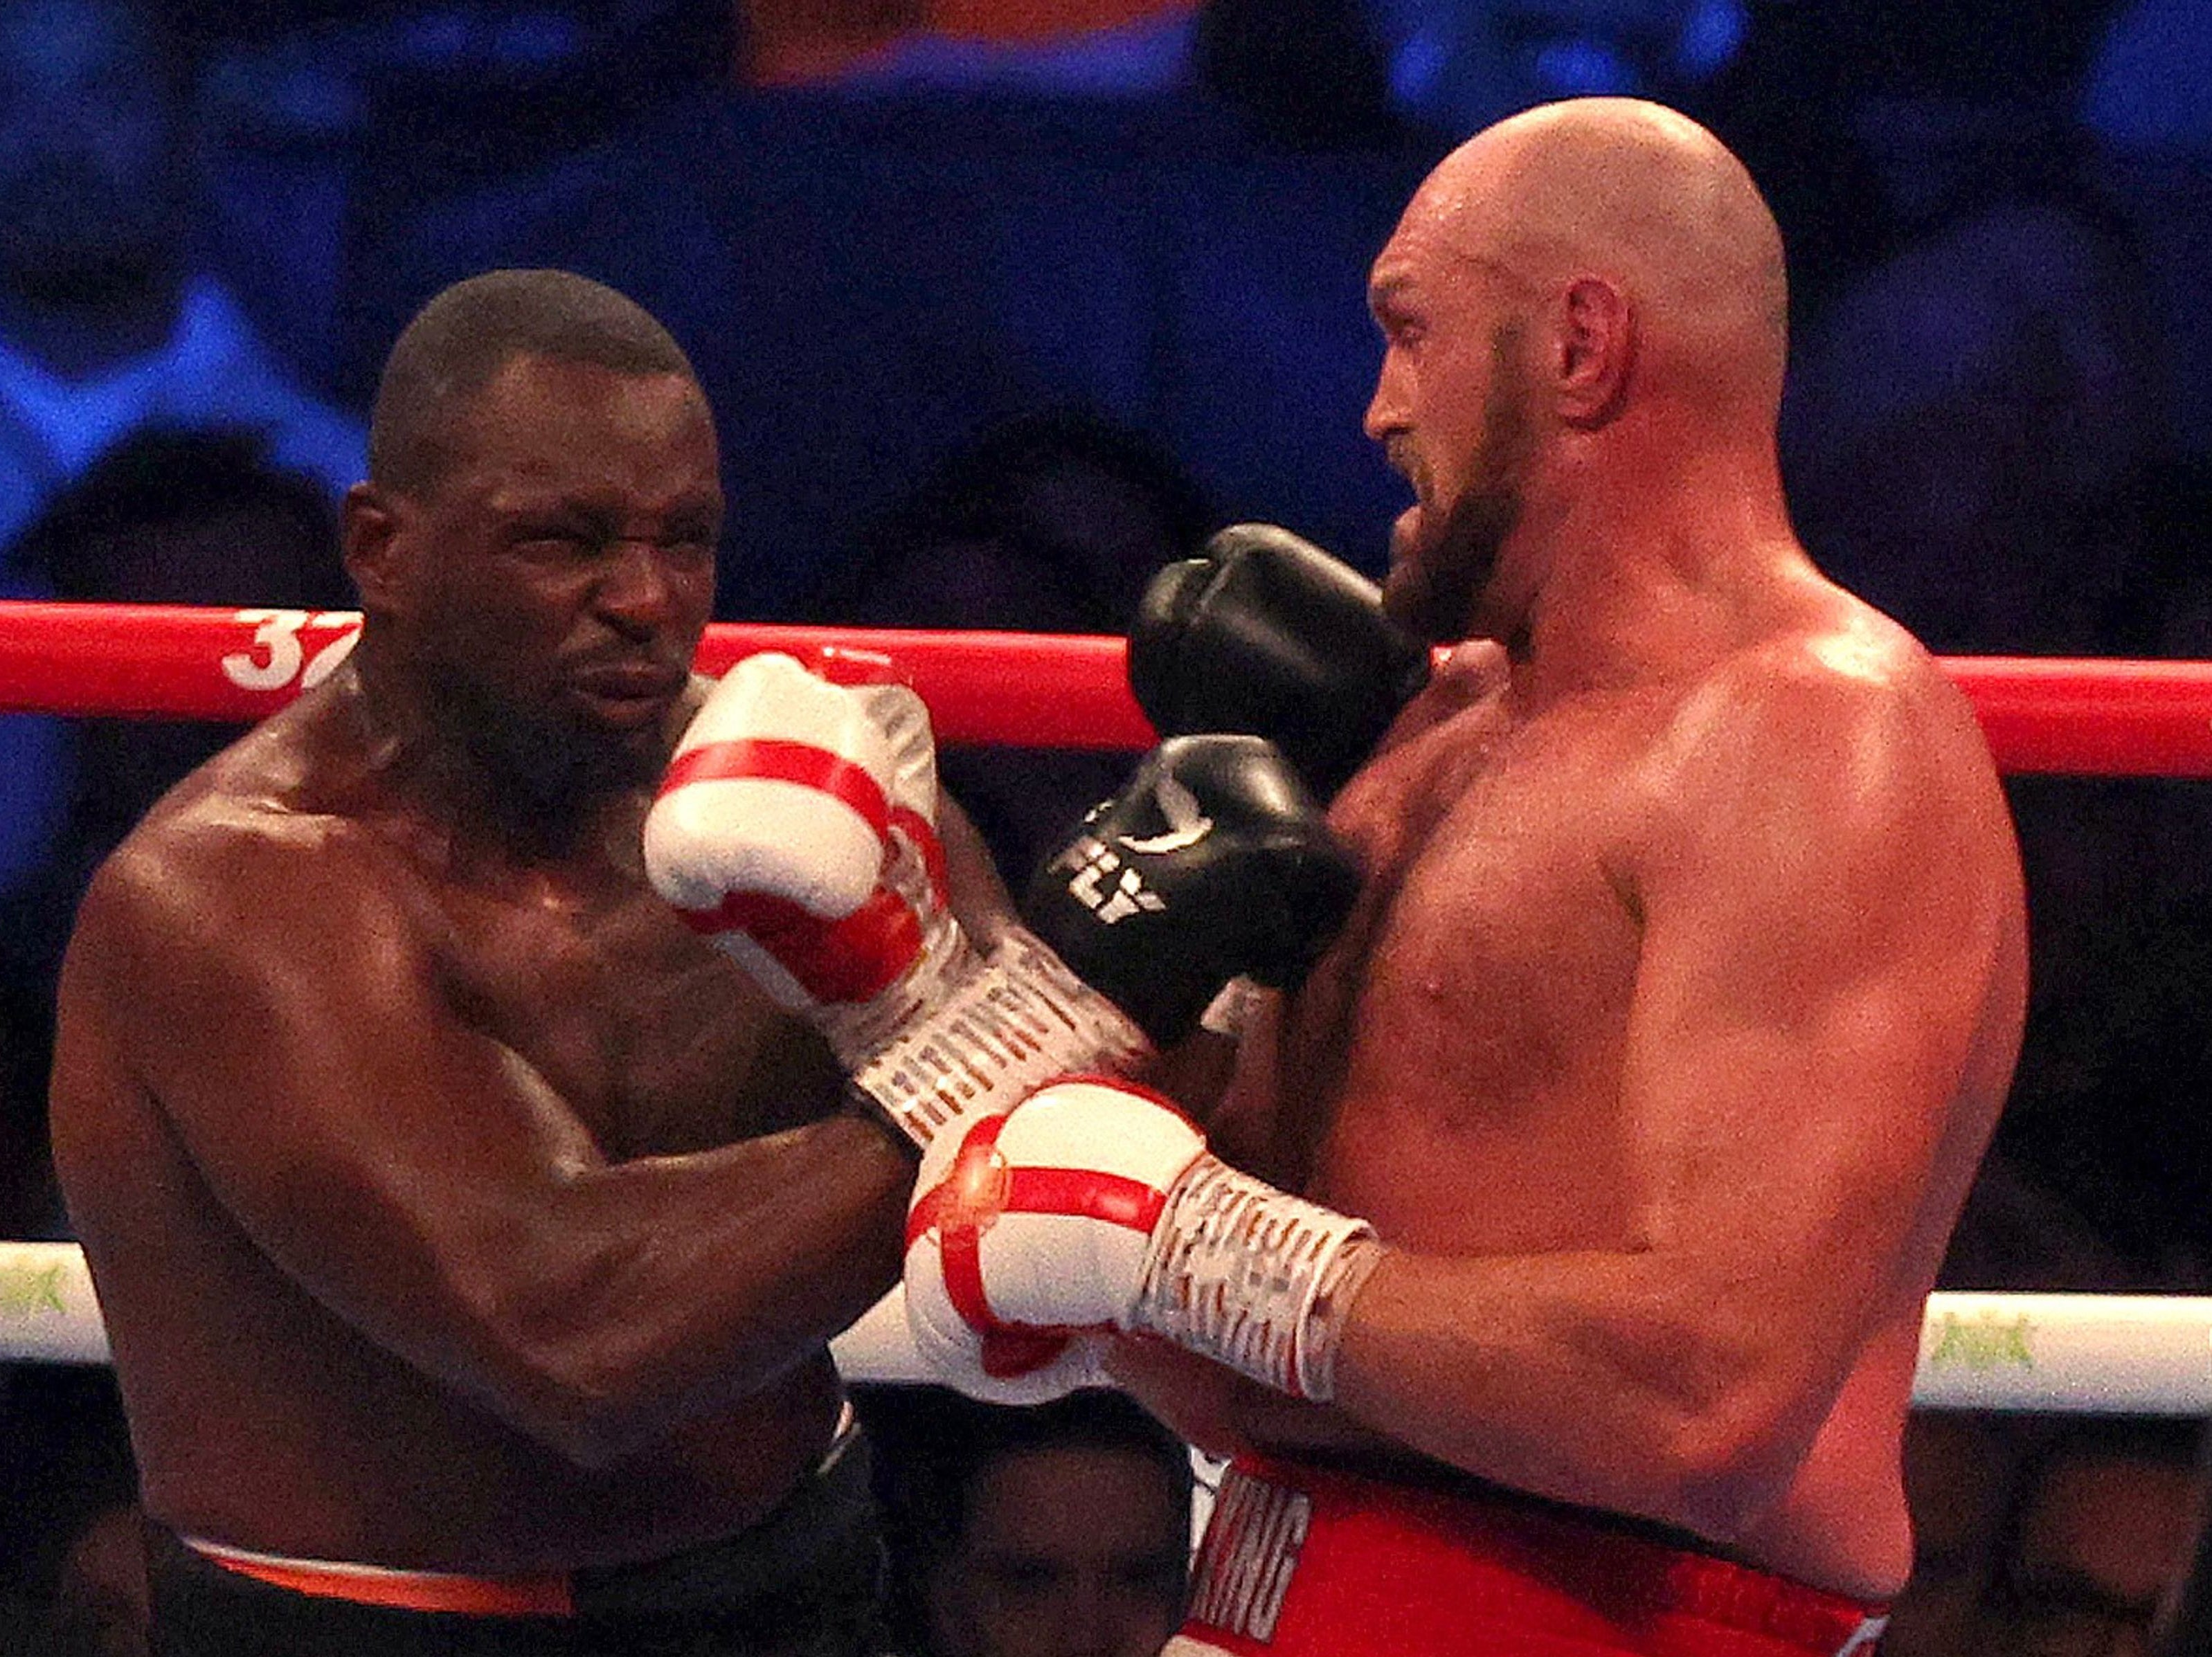 Tyson Fury knocks out Dillian Whyte at Wembley Stadium